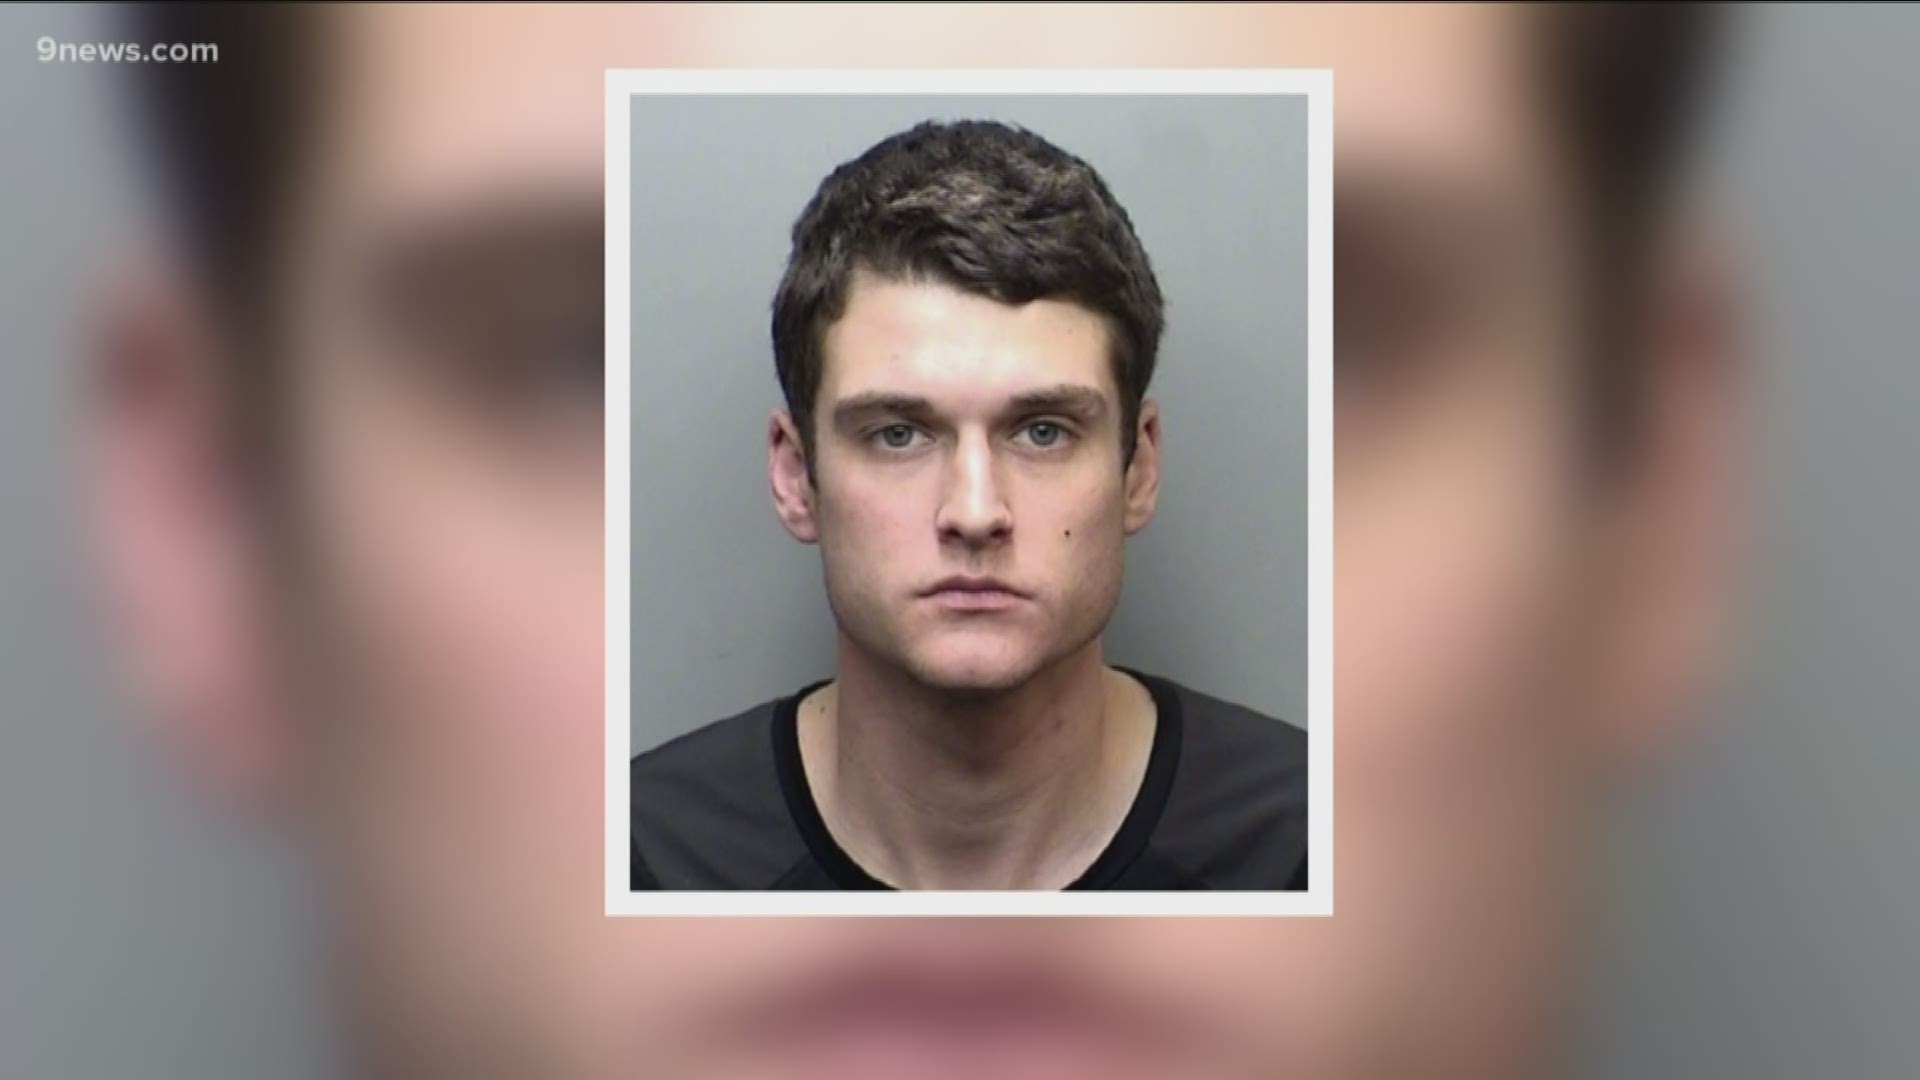 Investigators said they found more than 6,000 child porn files on Joshua Struna's computer last year. He was arrested again last month.